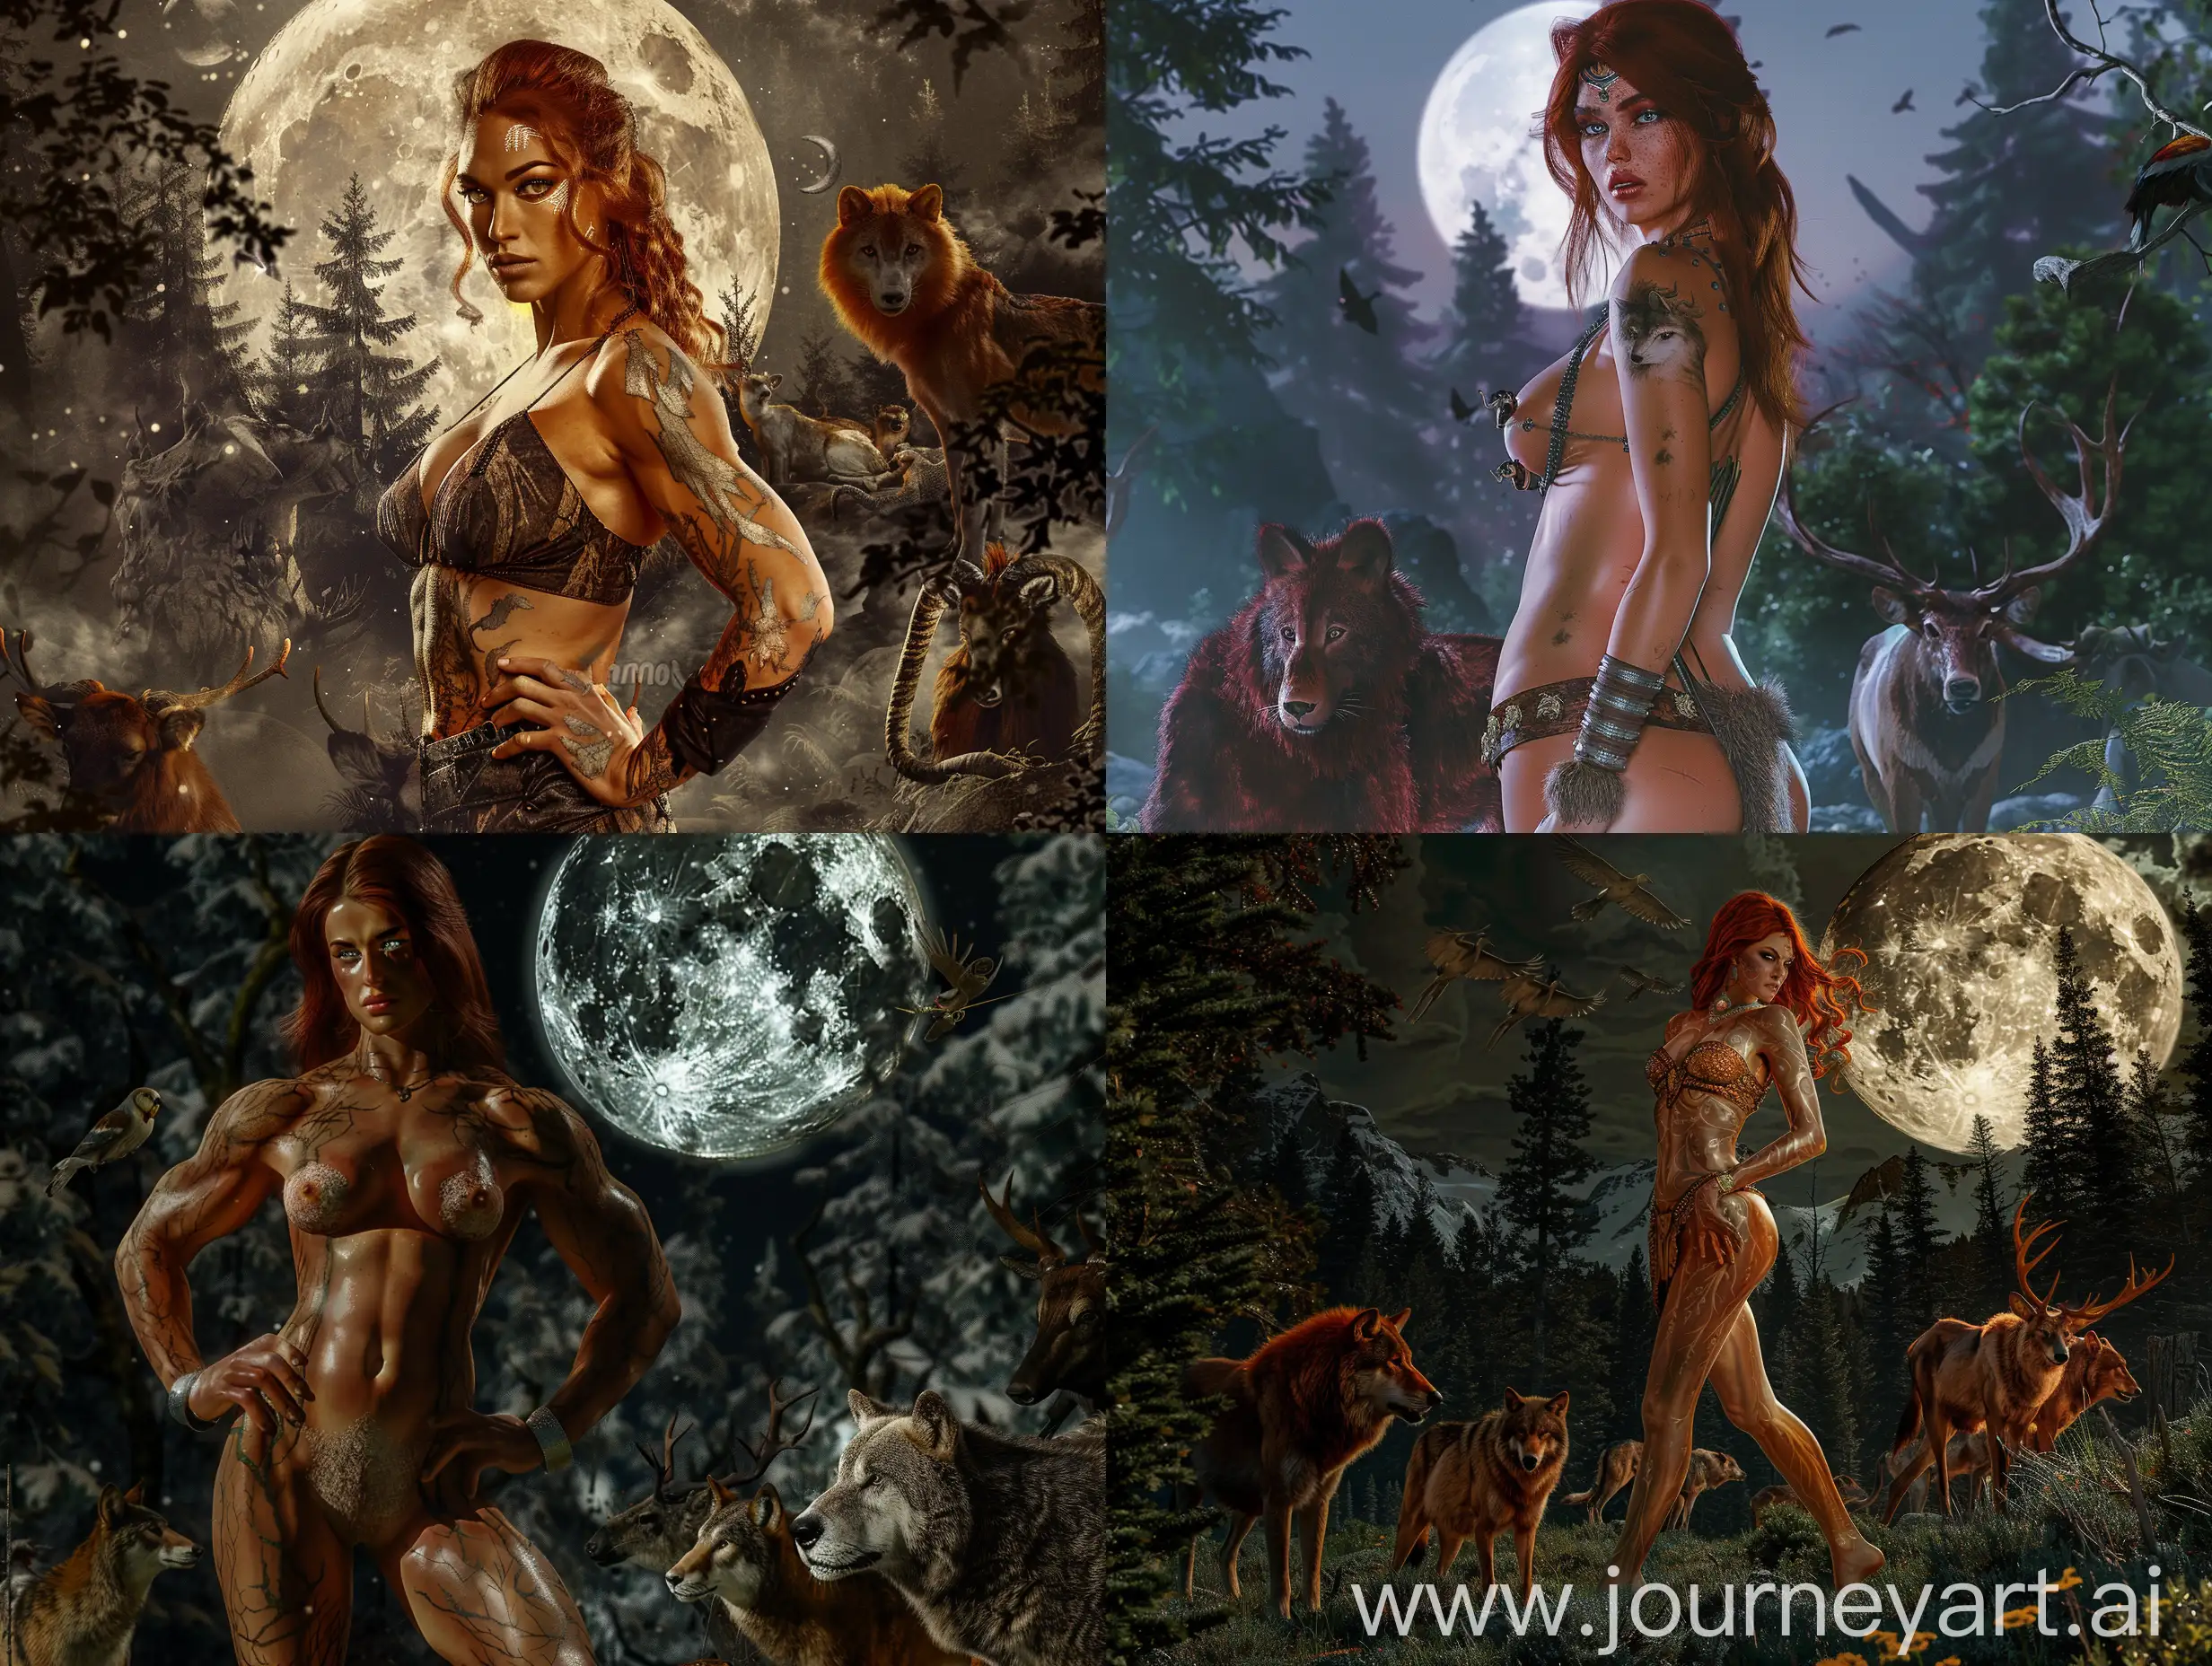 Goddess-of-the-Wild-Alabaster-Beauty-Reigns-over-Moonlit-Forests